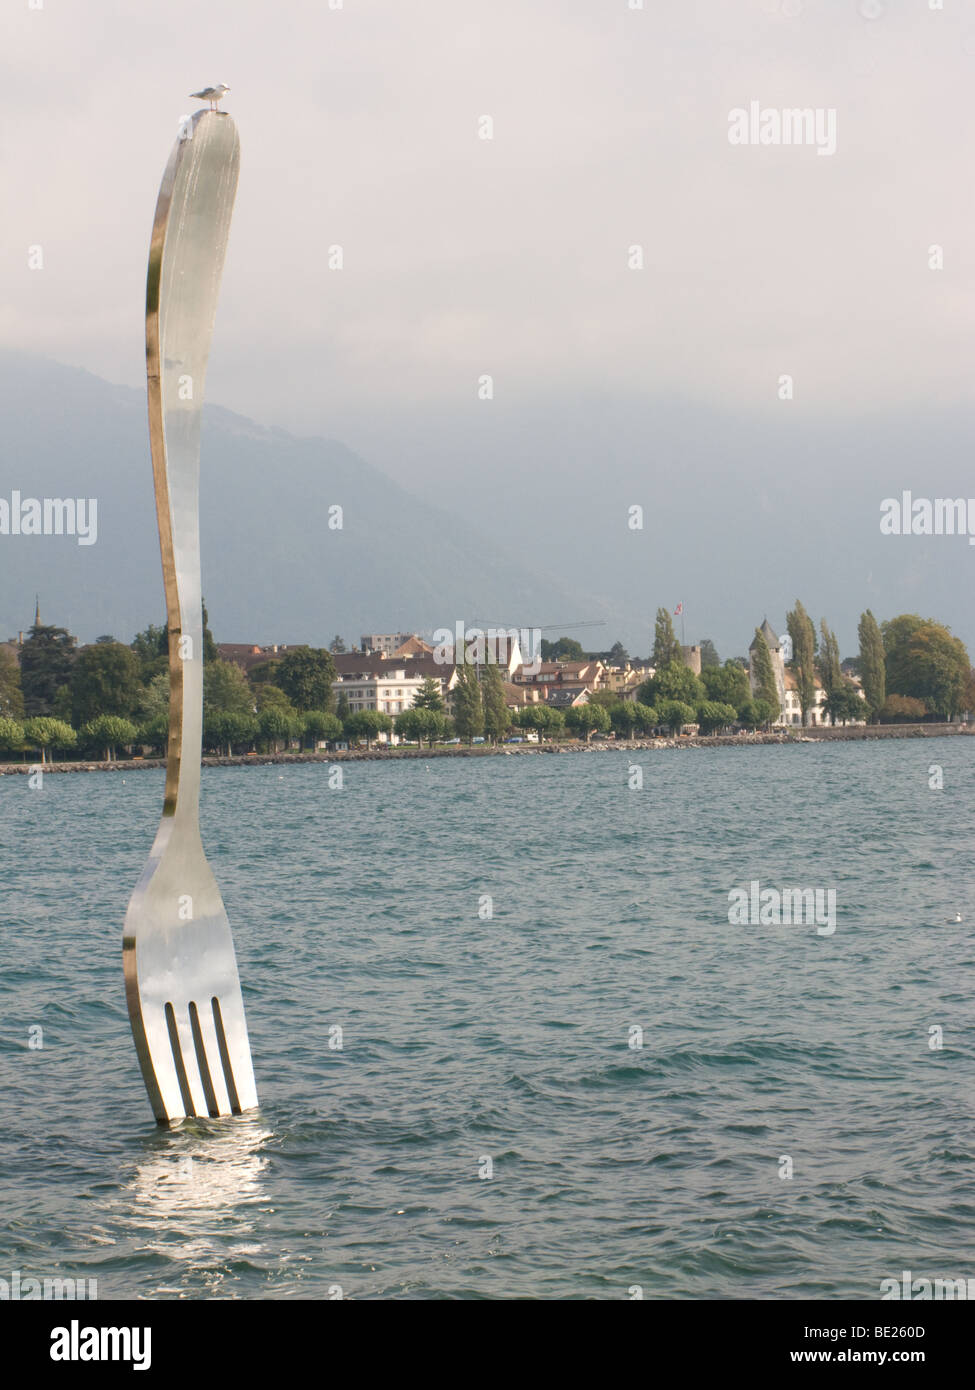 Giant sculptured fork protruding from a lake with a small bird sat on top Stock Photo